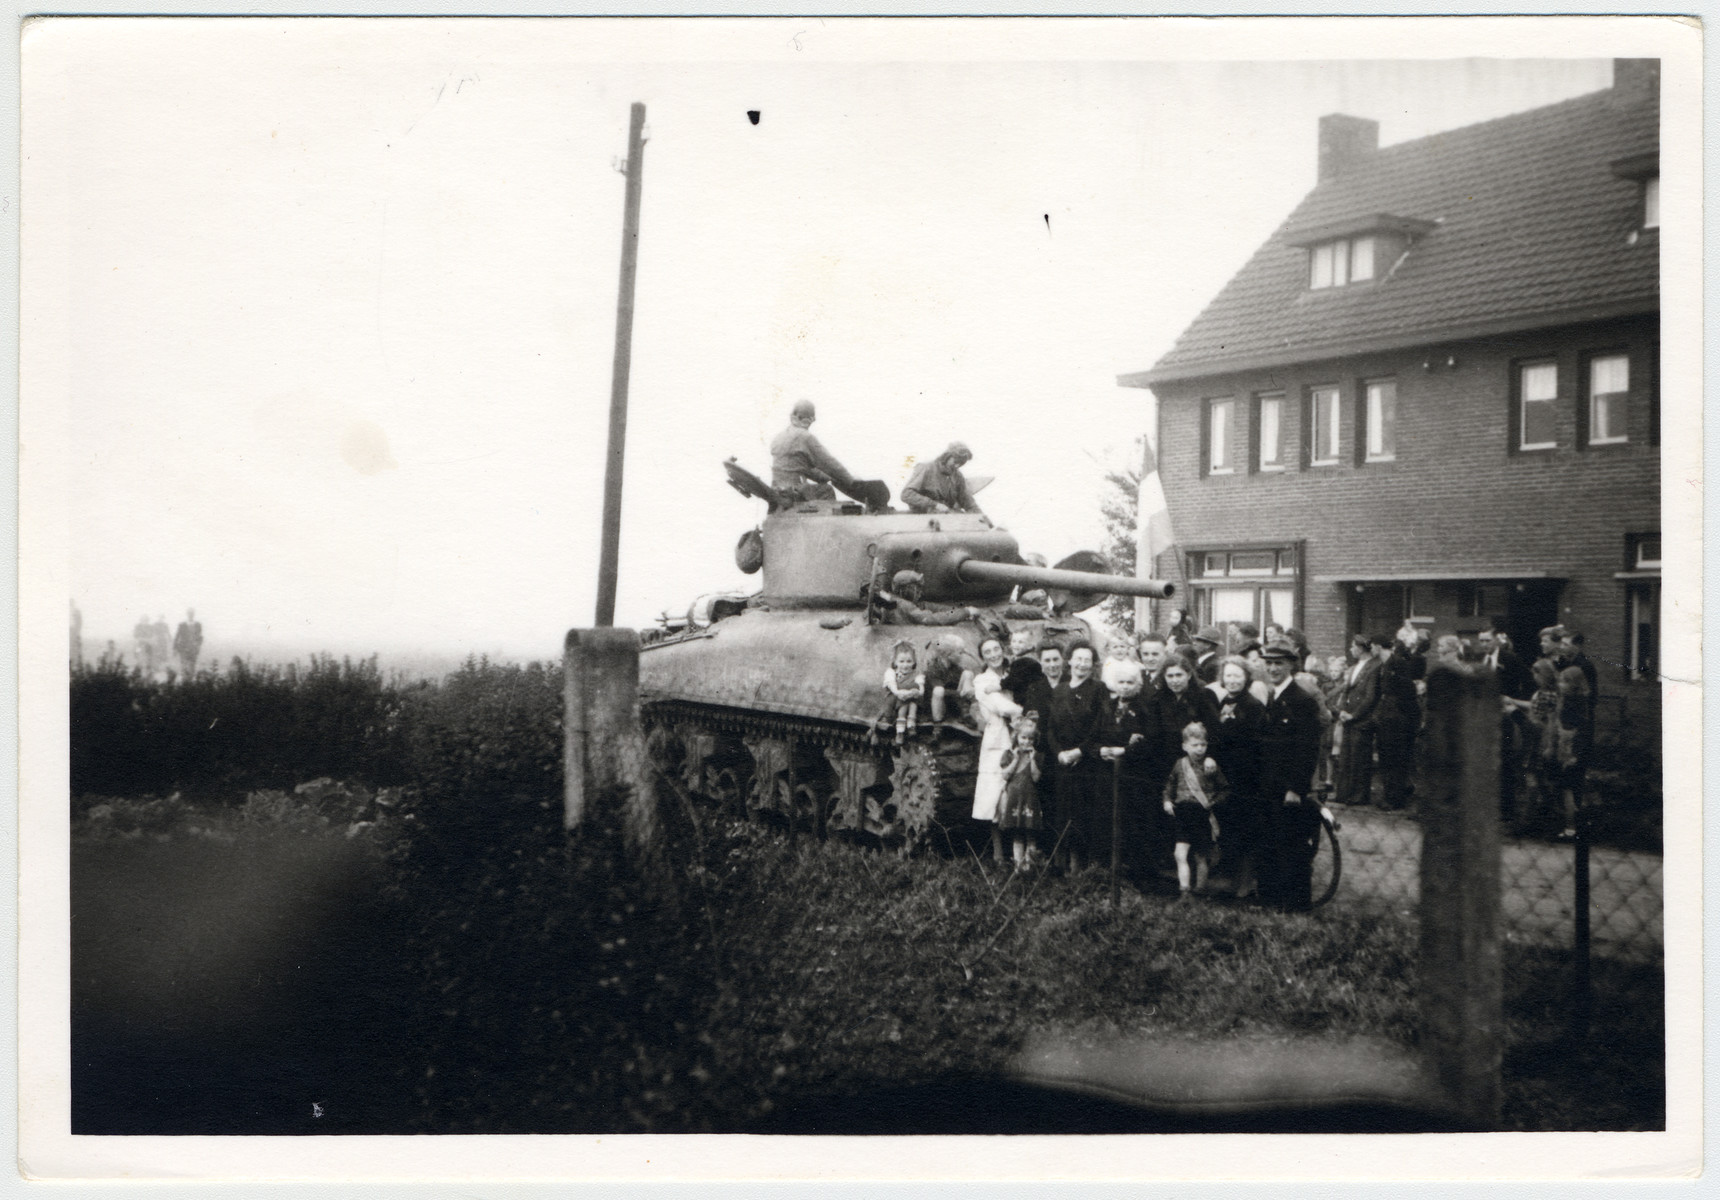 Residents of Treebeek welcome a Canadian tank who is liberating the village.